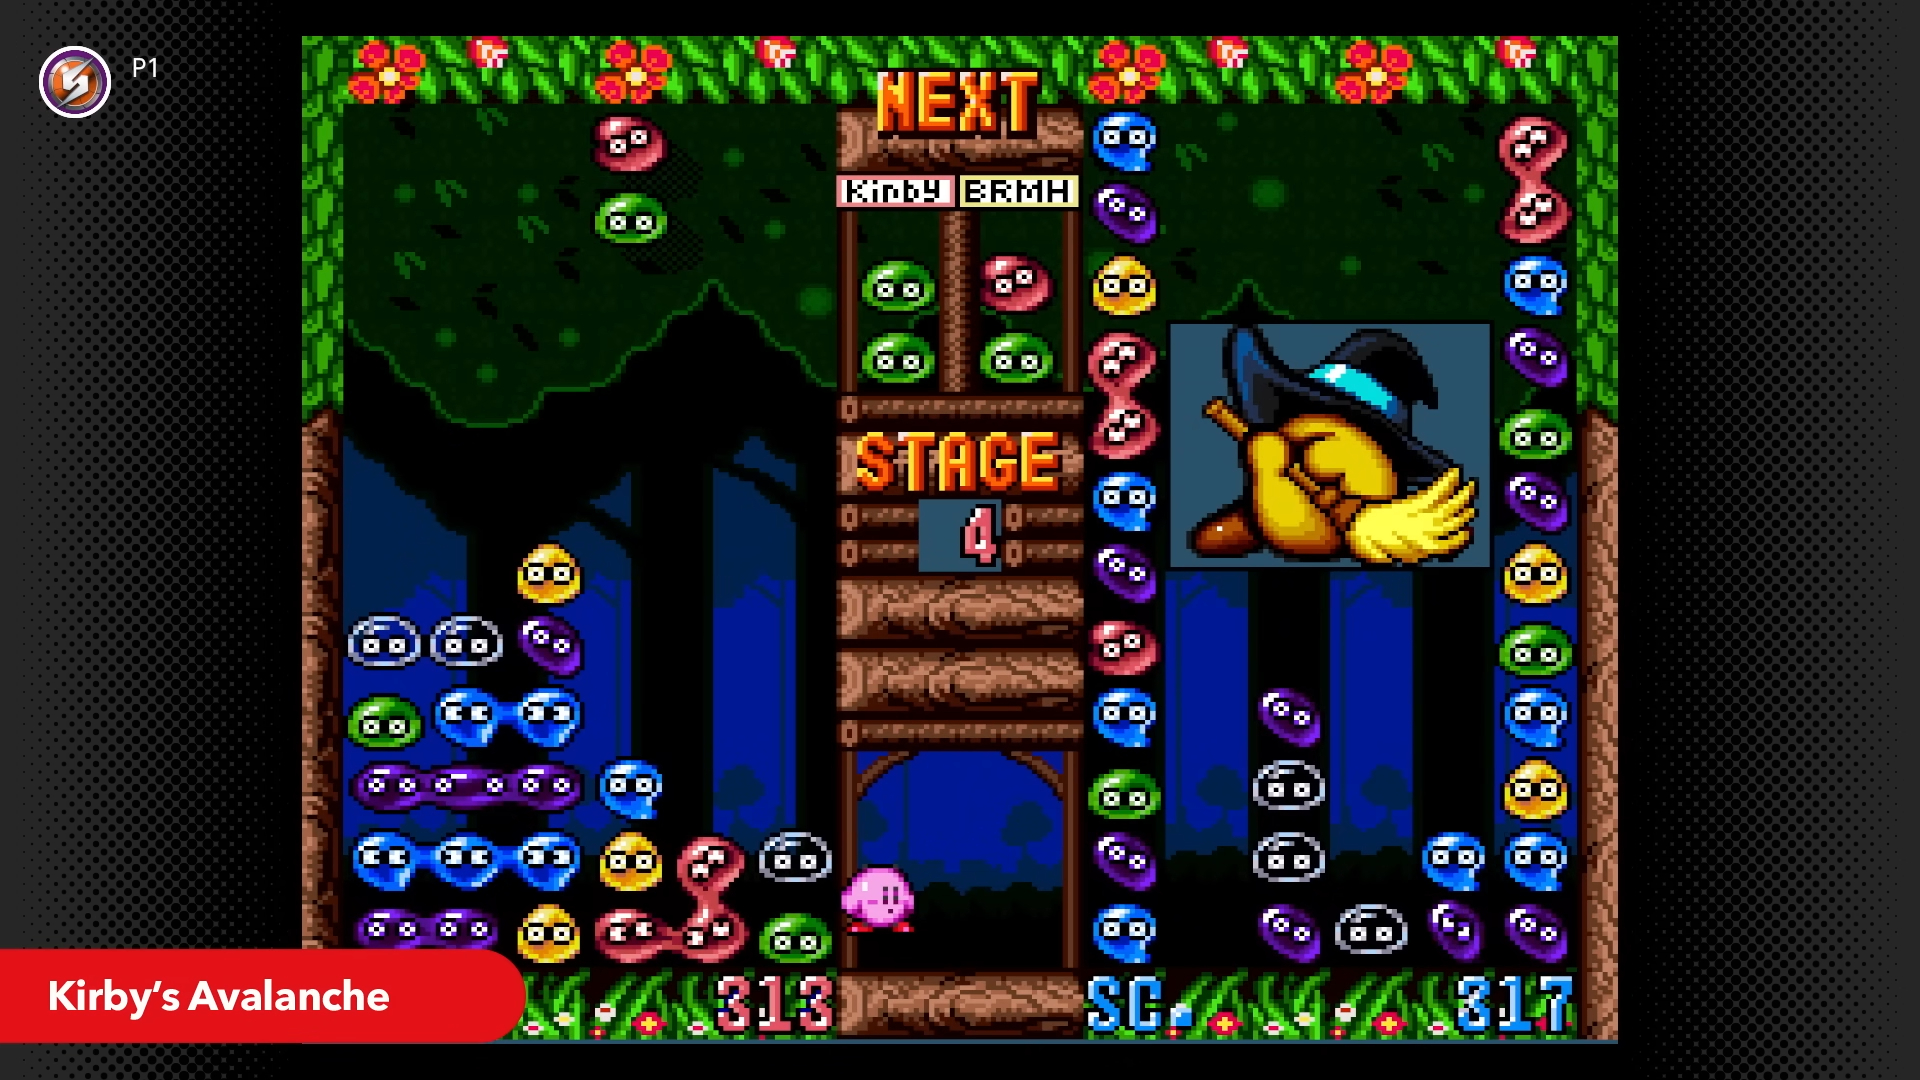 A screenshot from Kirby’s Avalanche, showing two columns of multicolored blobs stacked on top of each other, as additional blobs fall from the top of the screen onto the stack.